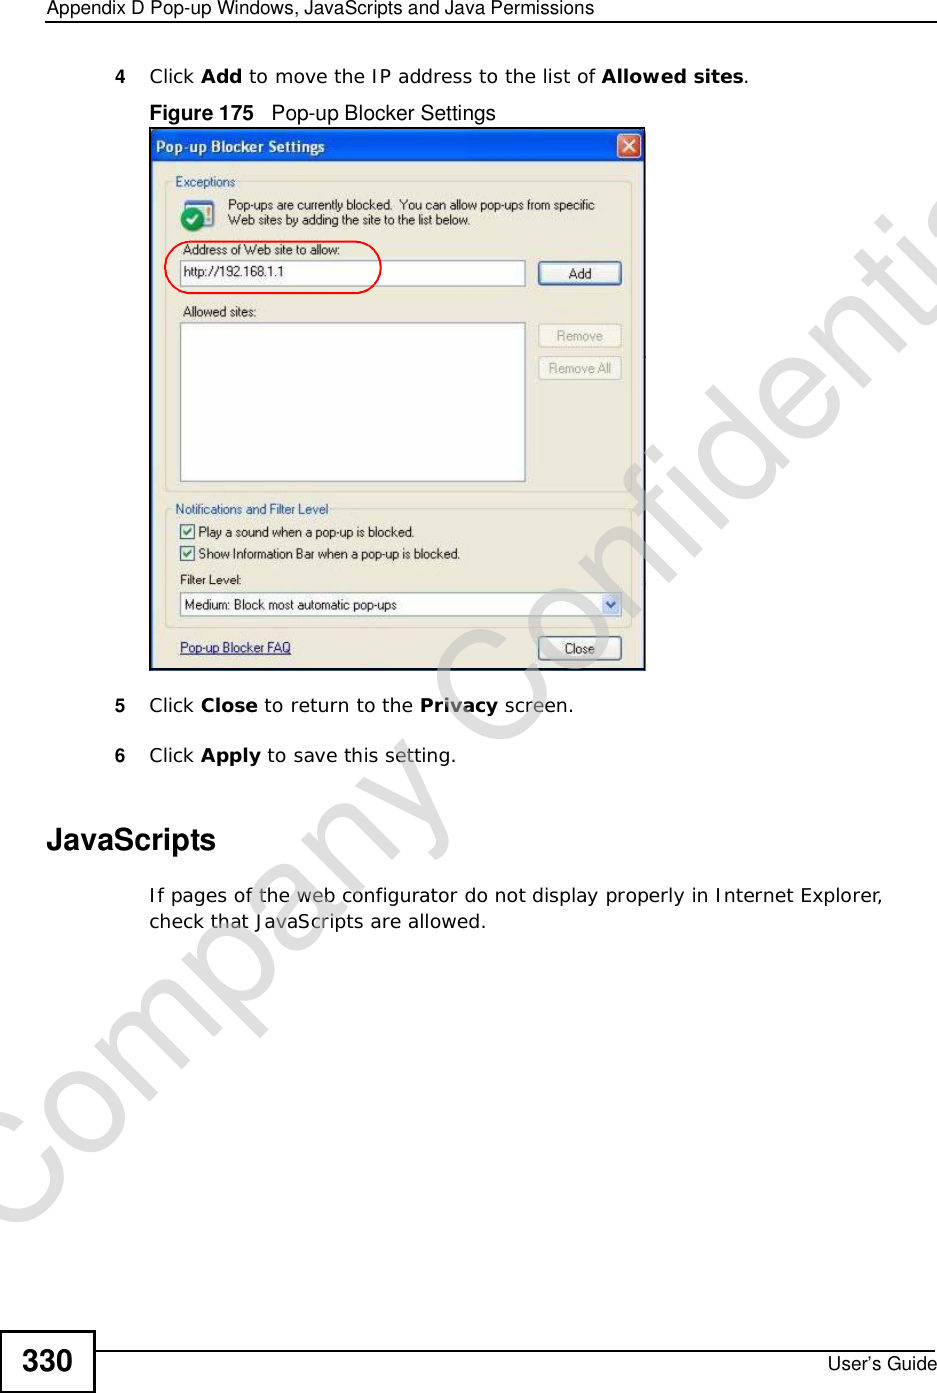 Appendix DPop-up Windows, JavaScripts and Java PermissionsUser’s Guide3304Click Add to move the IP address to the list of Allowed sites.Figure 175   Pop-up Blocker Settings5Click Close to return to the Privacy screen. 6Click Apply to save this setting. JavaScriptsIf pages of the web configurator do not display properly in Internet Explorer, check that JavaScripts are allowed. Company Confidential